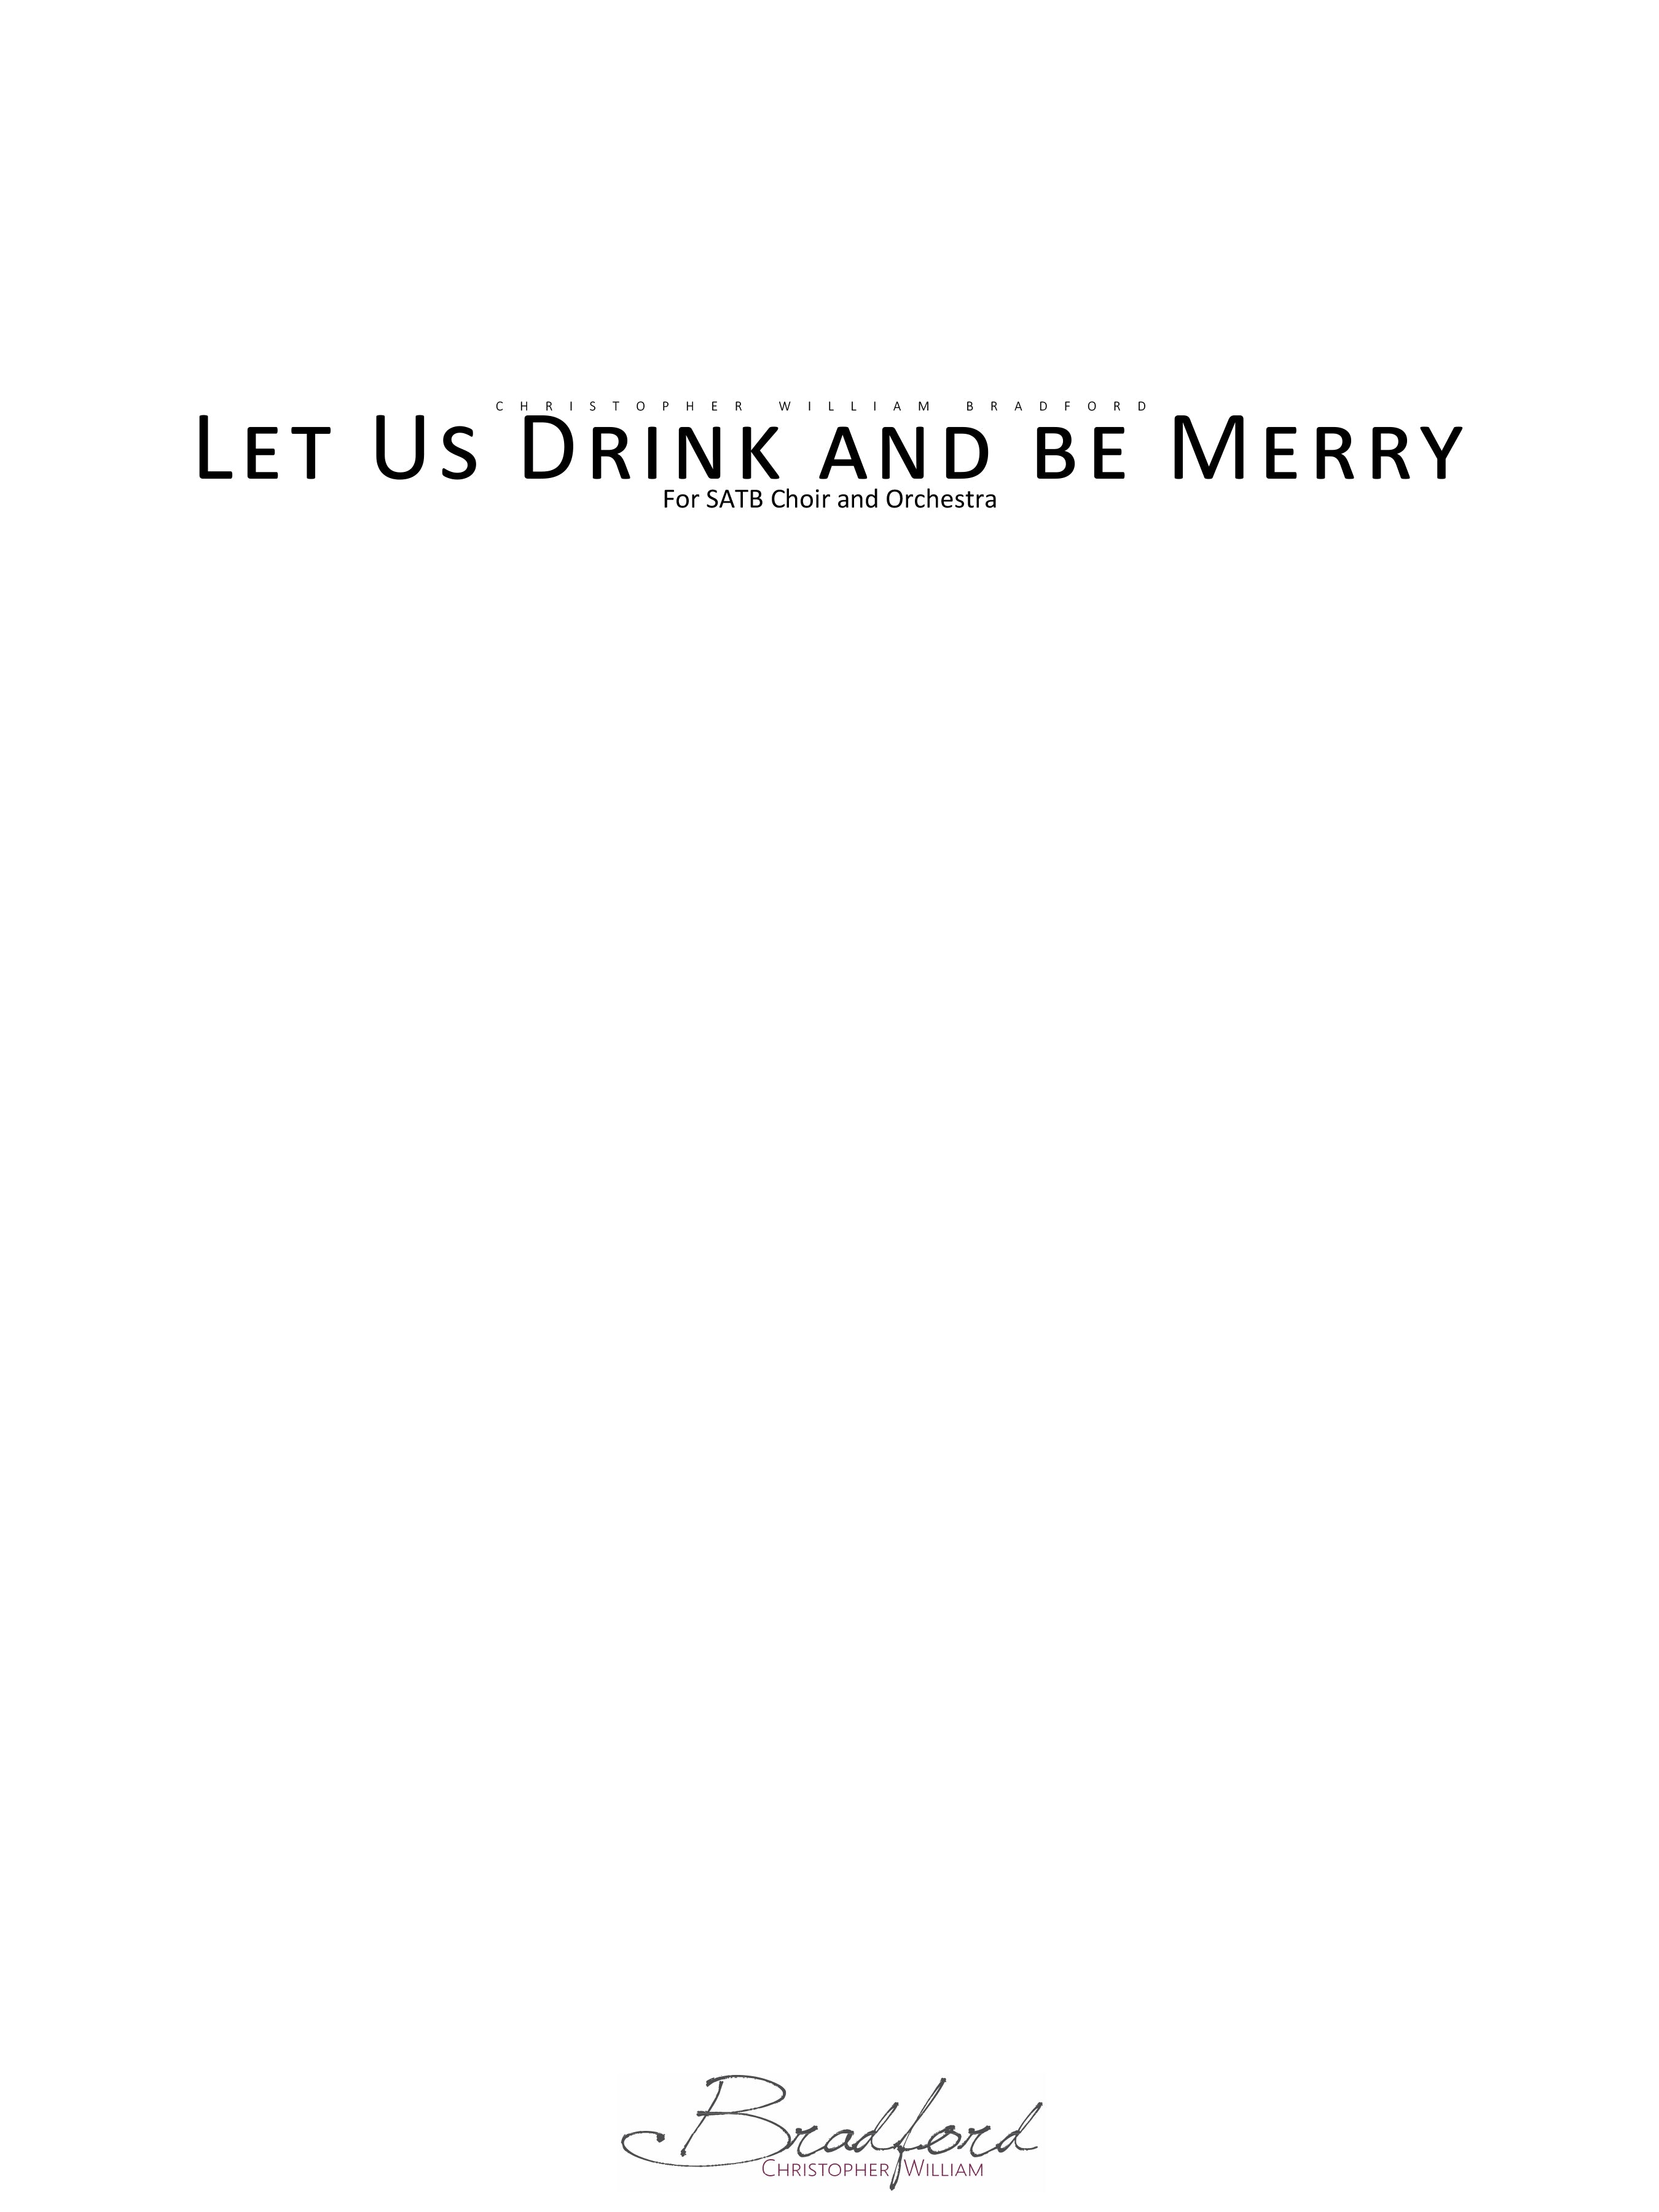 Let Us Drink and be Merry